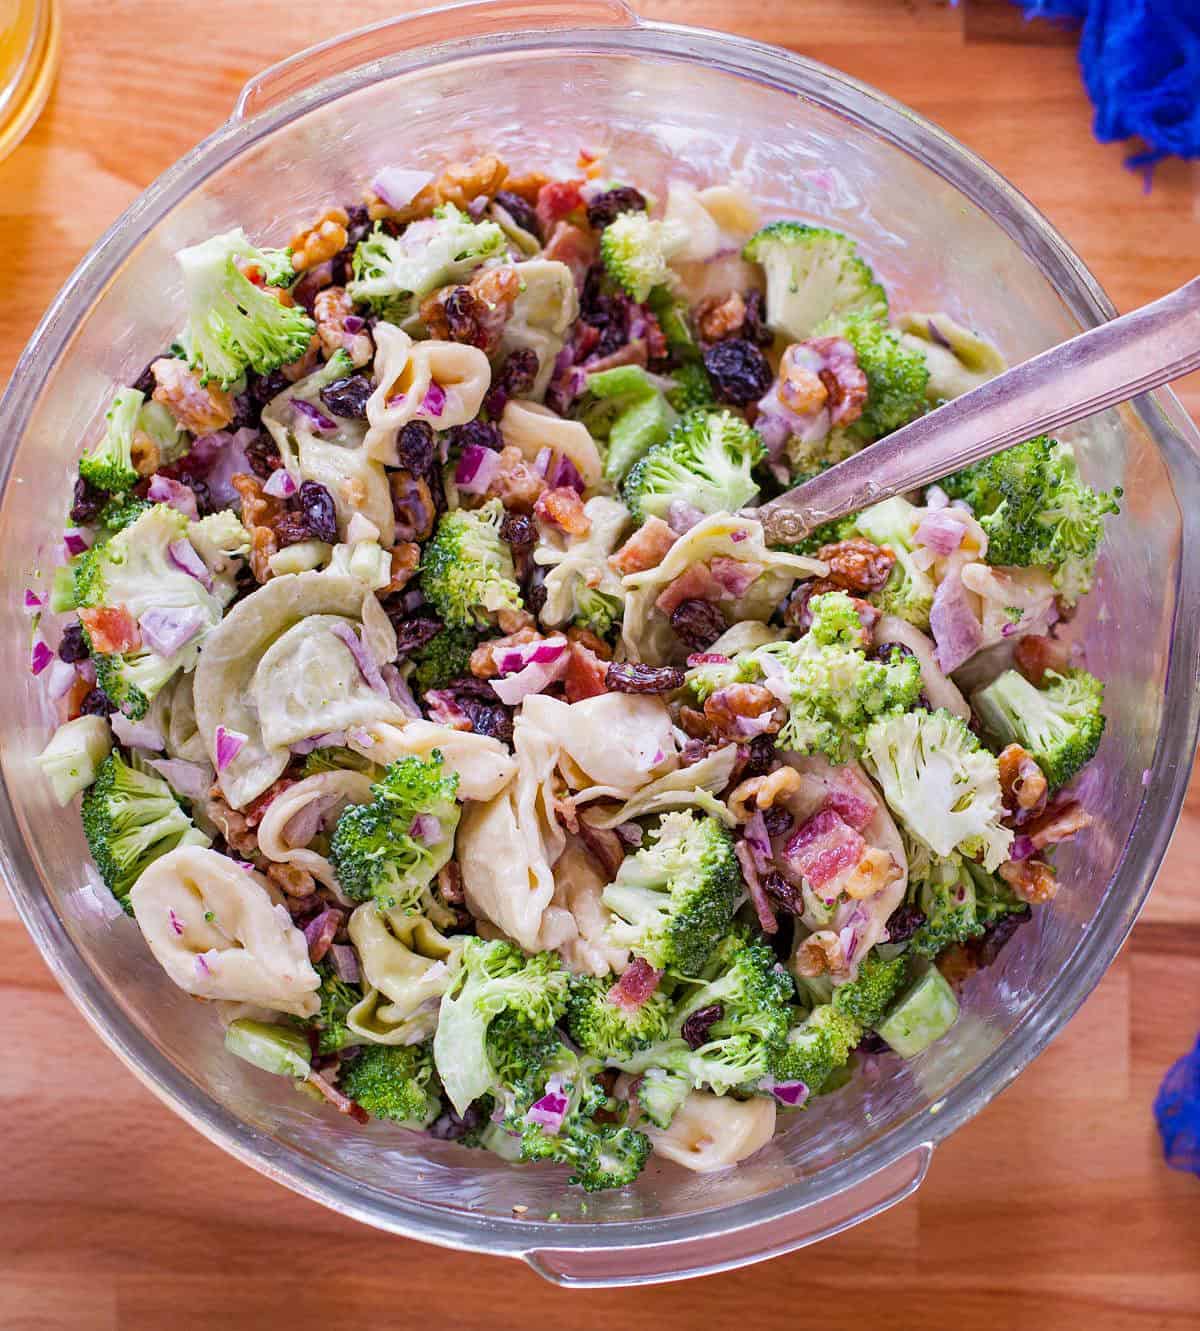  Get ready to indulge in a delicious and healthy broccoli and tortellini salad!